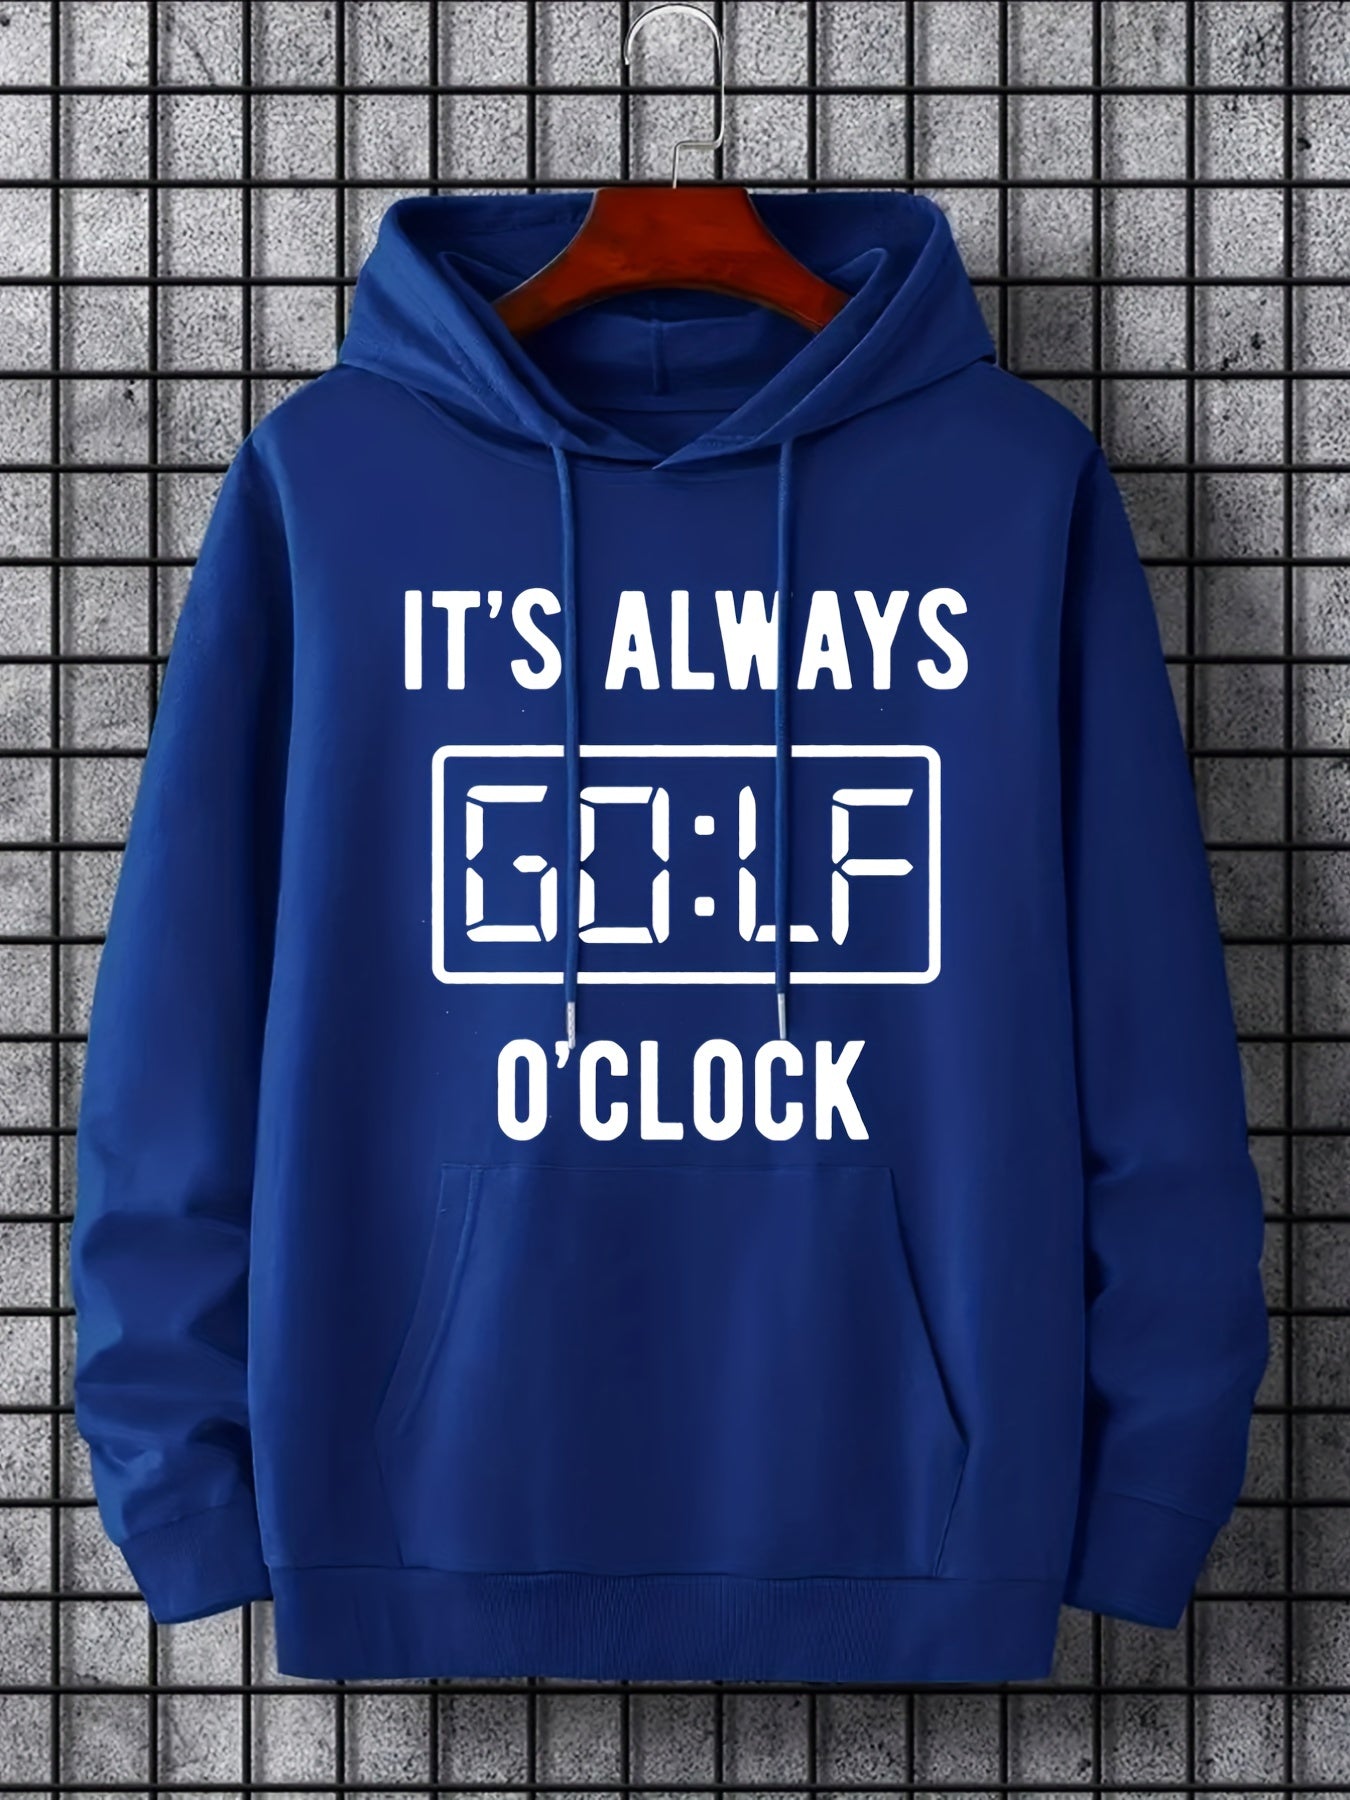 Hoodies For Men, Funny 'Always Golf Clock' Hoodie, Men's Casual Pullover Hooded Sweatshirt With Kangaroo Pocket For Spring Fall, As Gifts